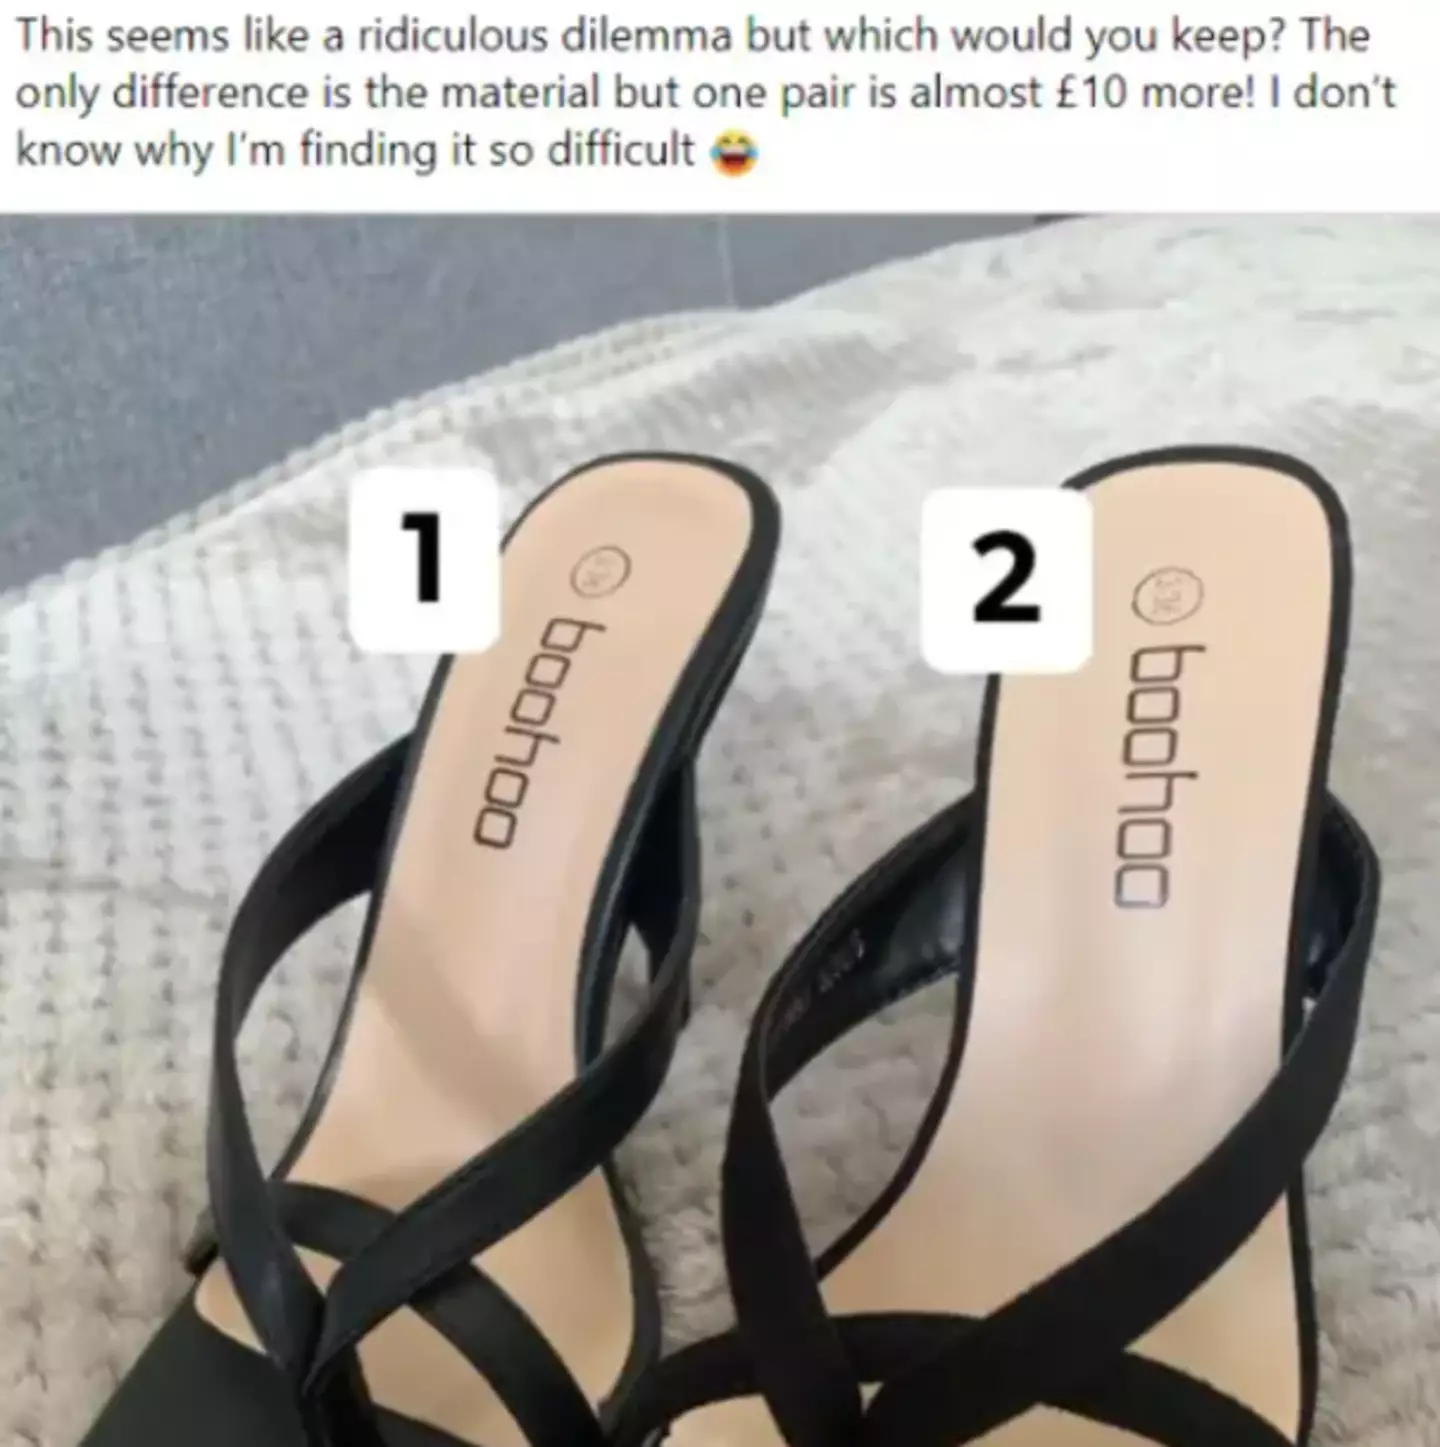 The woman asked for advice over a pair of identical heels (